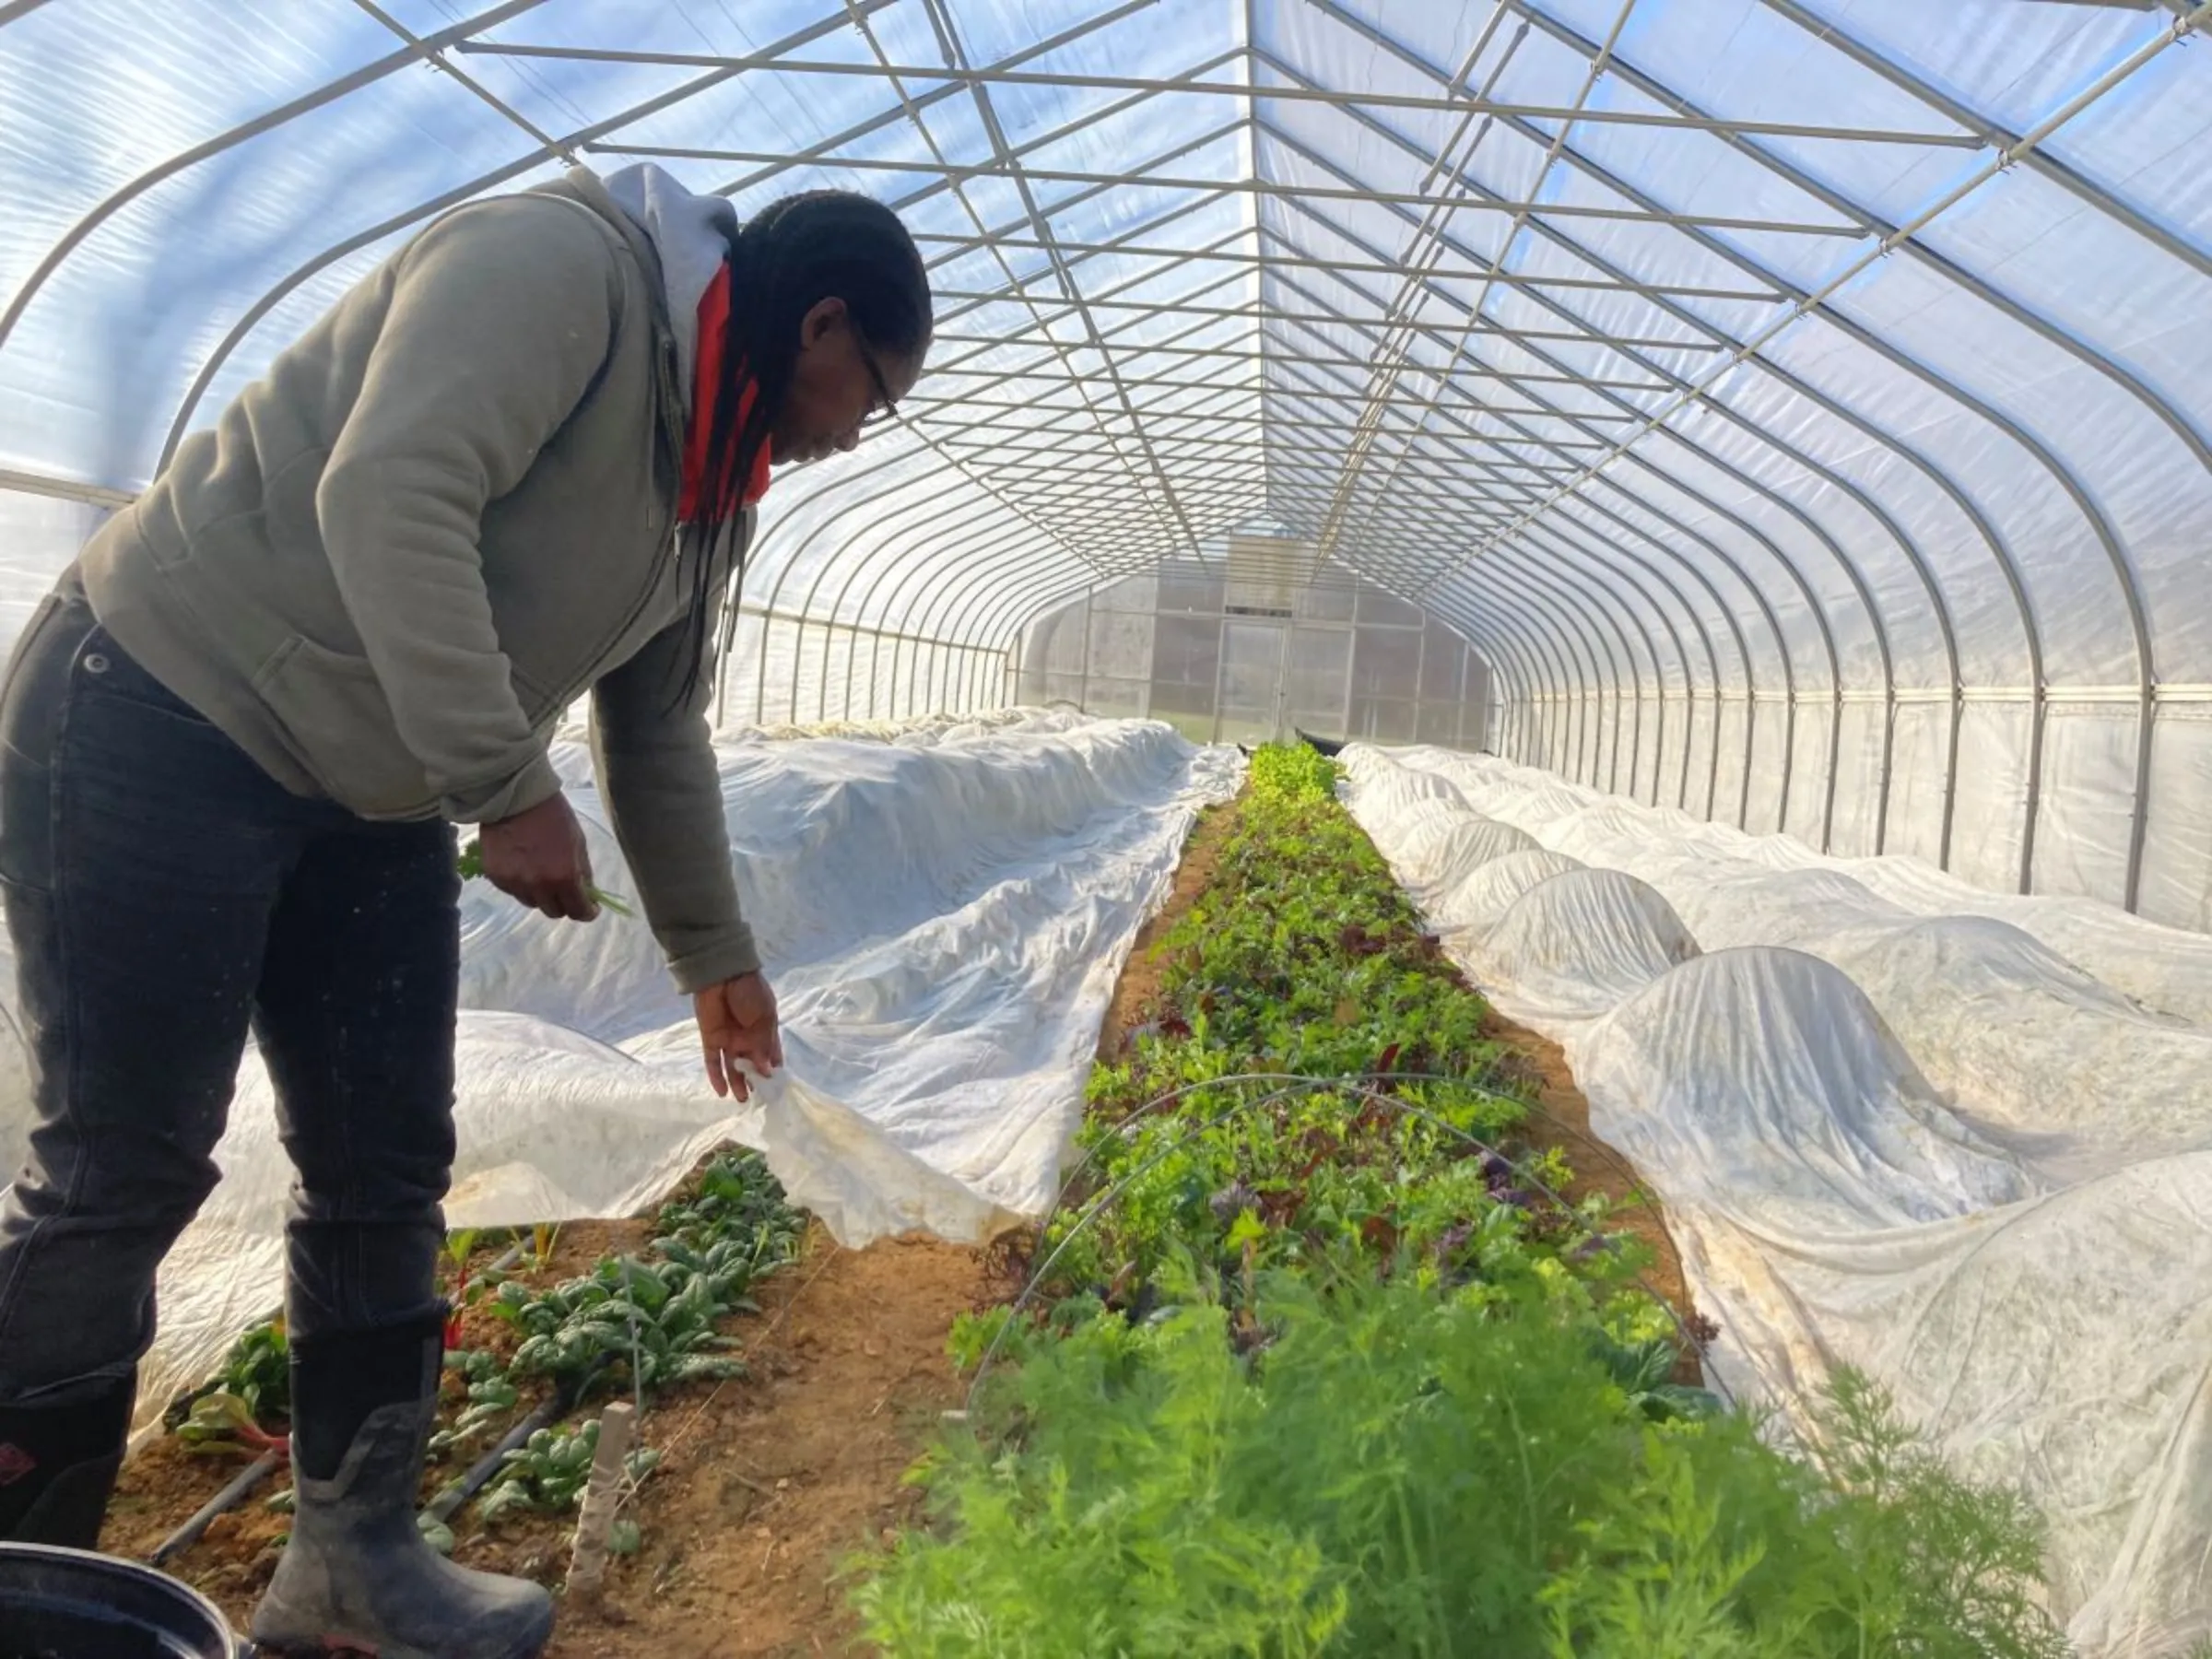 Farmer Gale Livingstone looks over vegetables growing in a greenhouse in Upper Marlboro, Maryland, on November 21, 2022